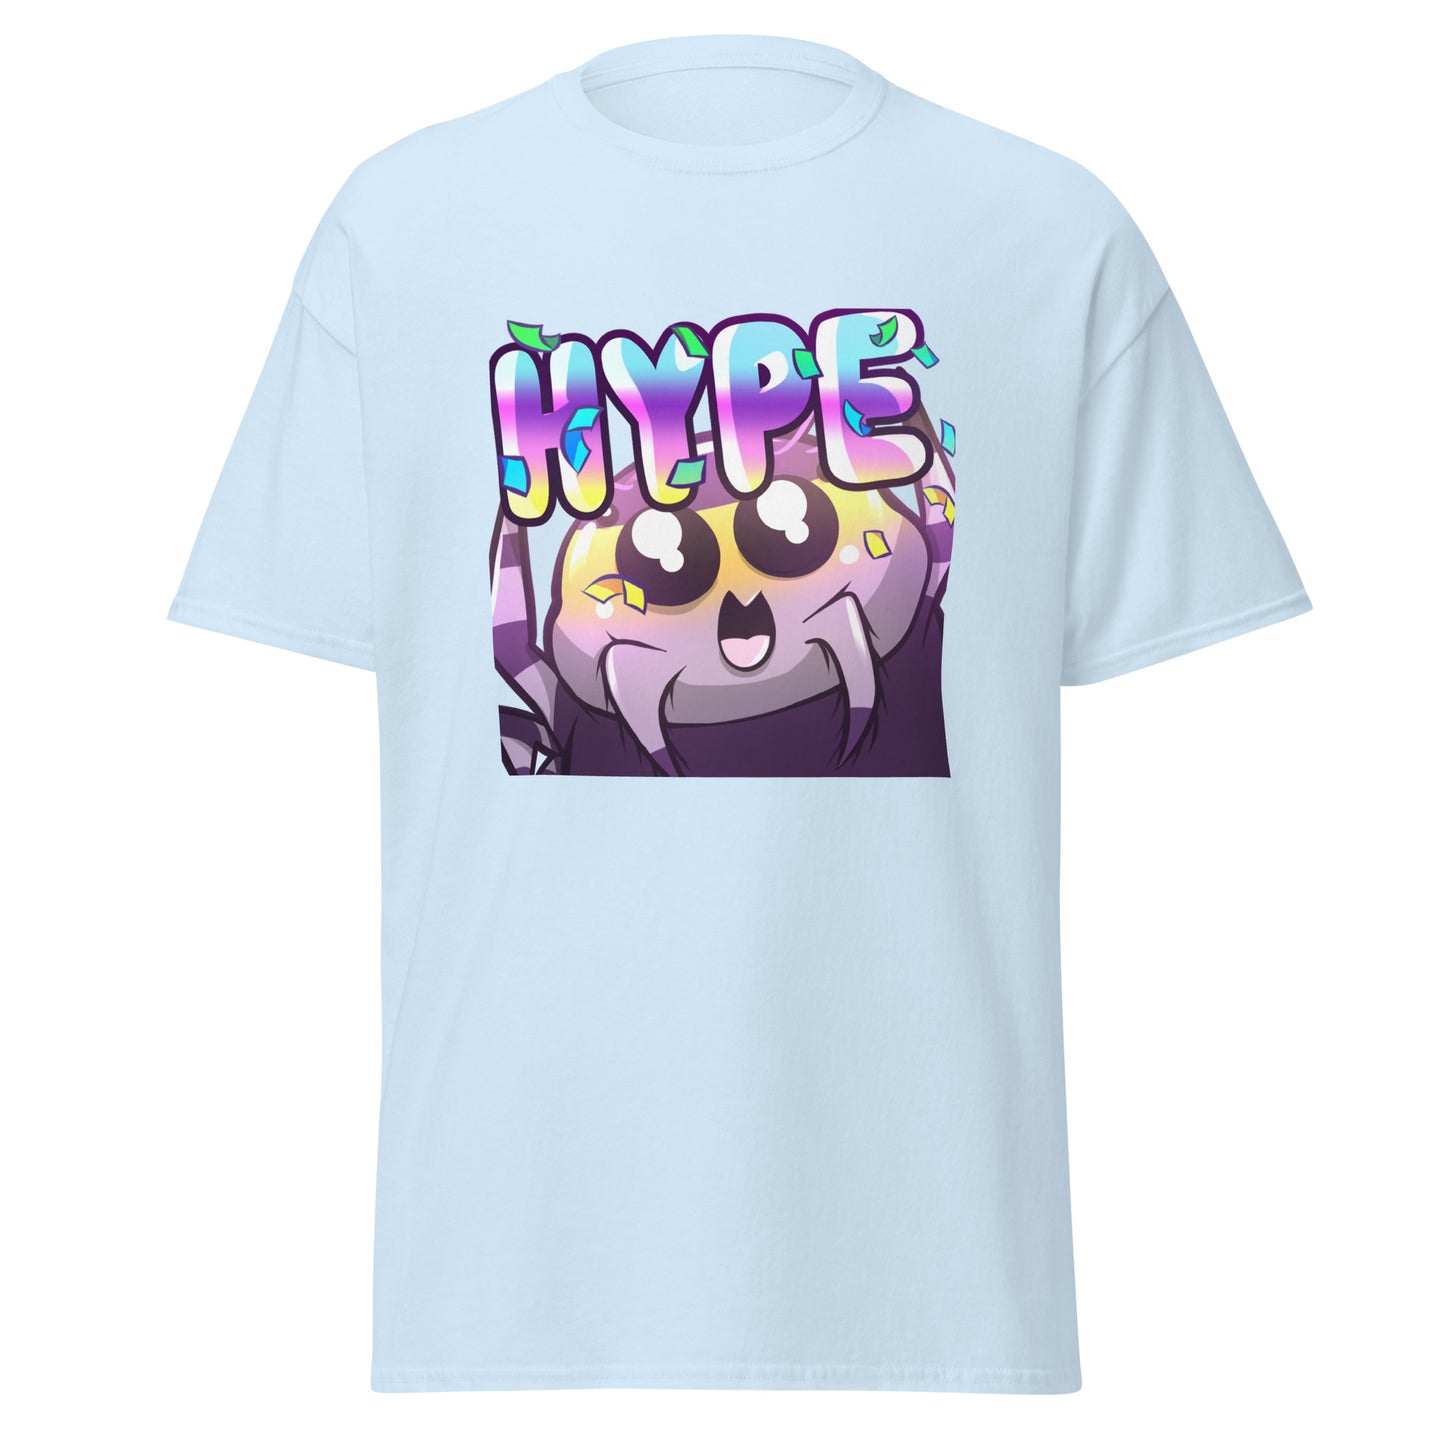 Purple Spider Hype Gamer T-Shirt - Soft, Comfortable, and Unique Design